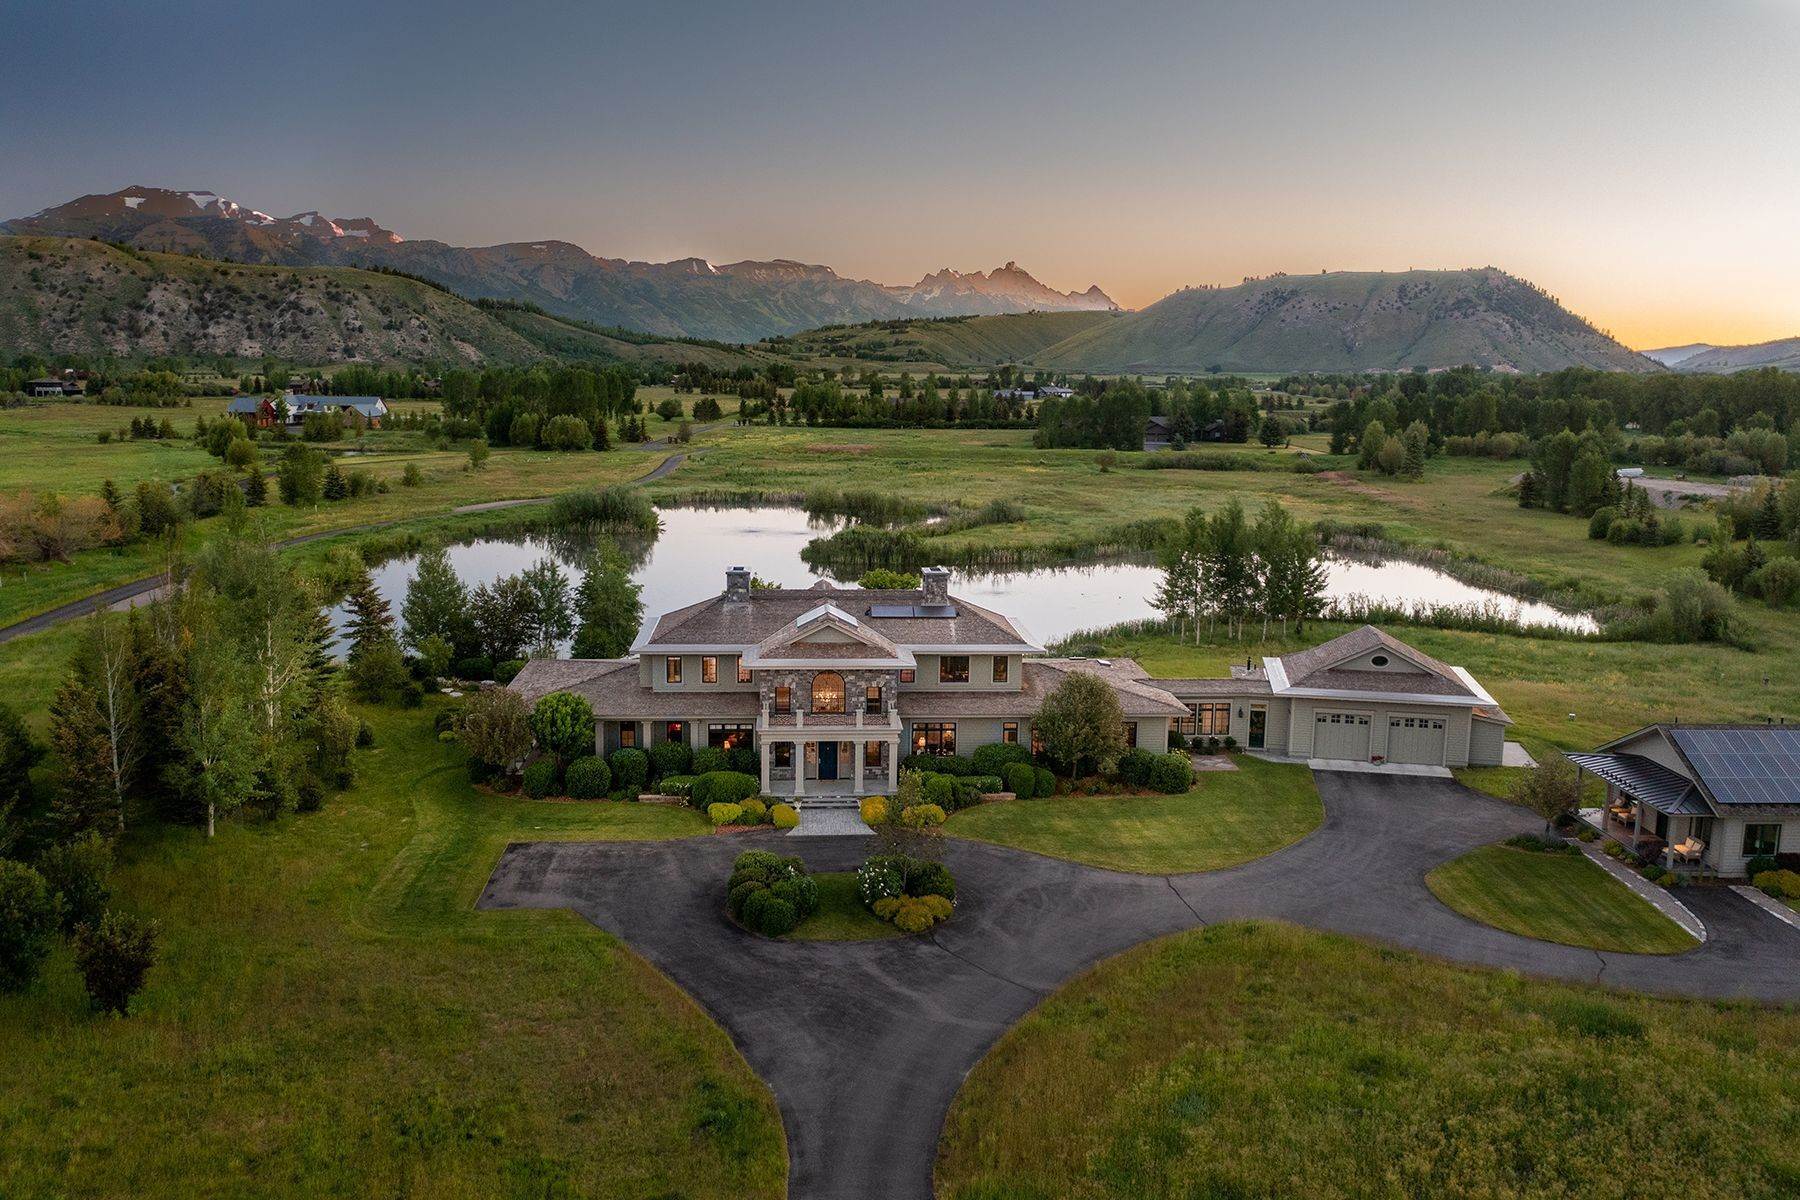 Property for Sale at Sanctuary with Teton Views in Dairy Ranches 2670 W Dairy Lane Jackson, Wyoming 83001 United States